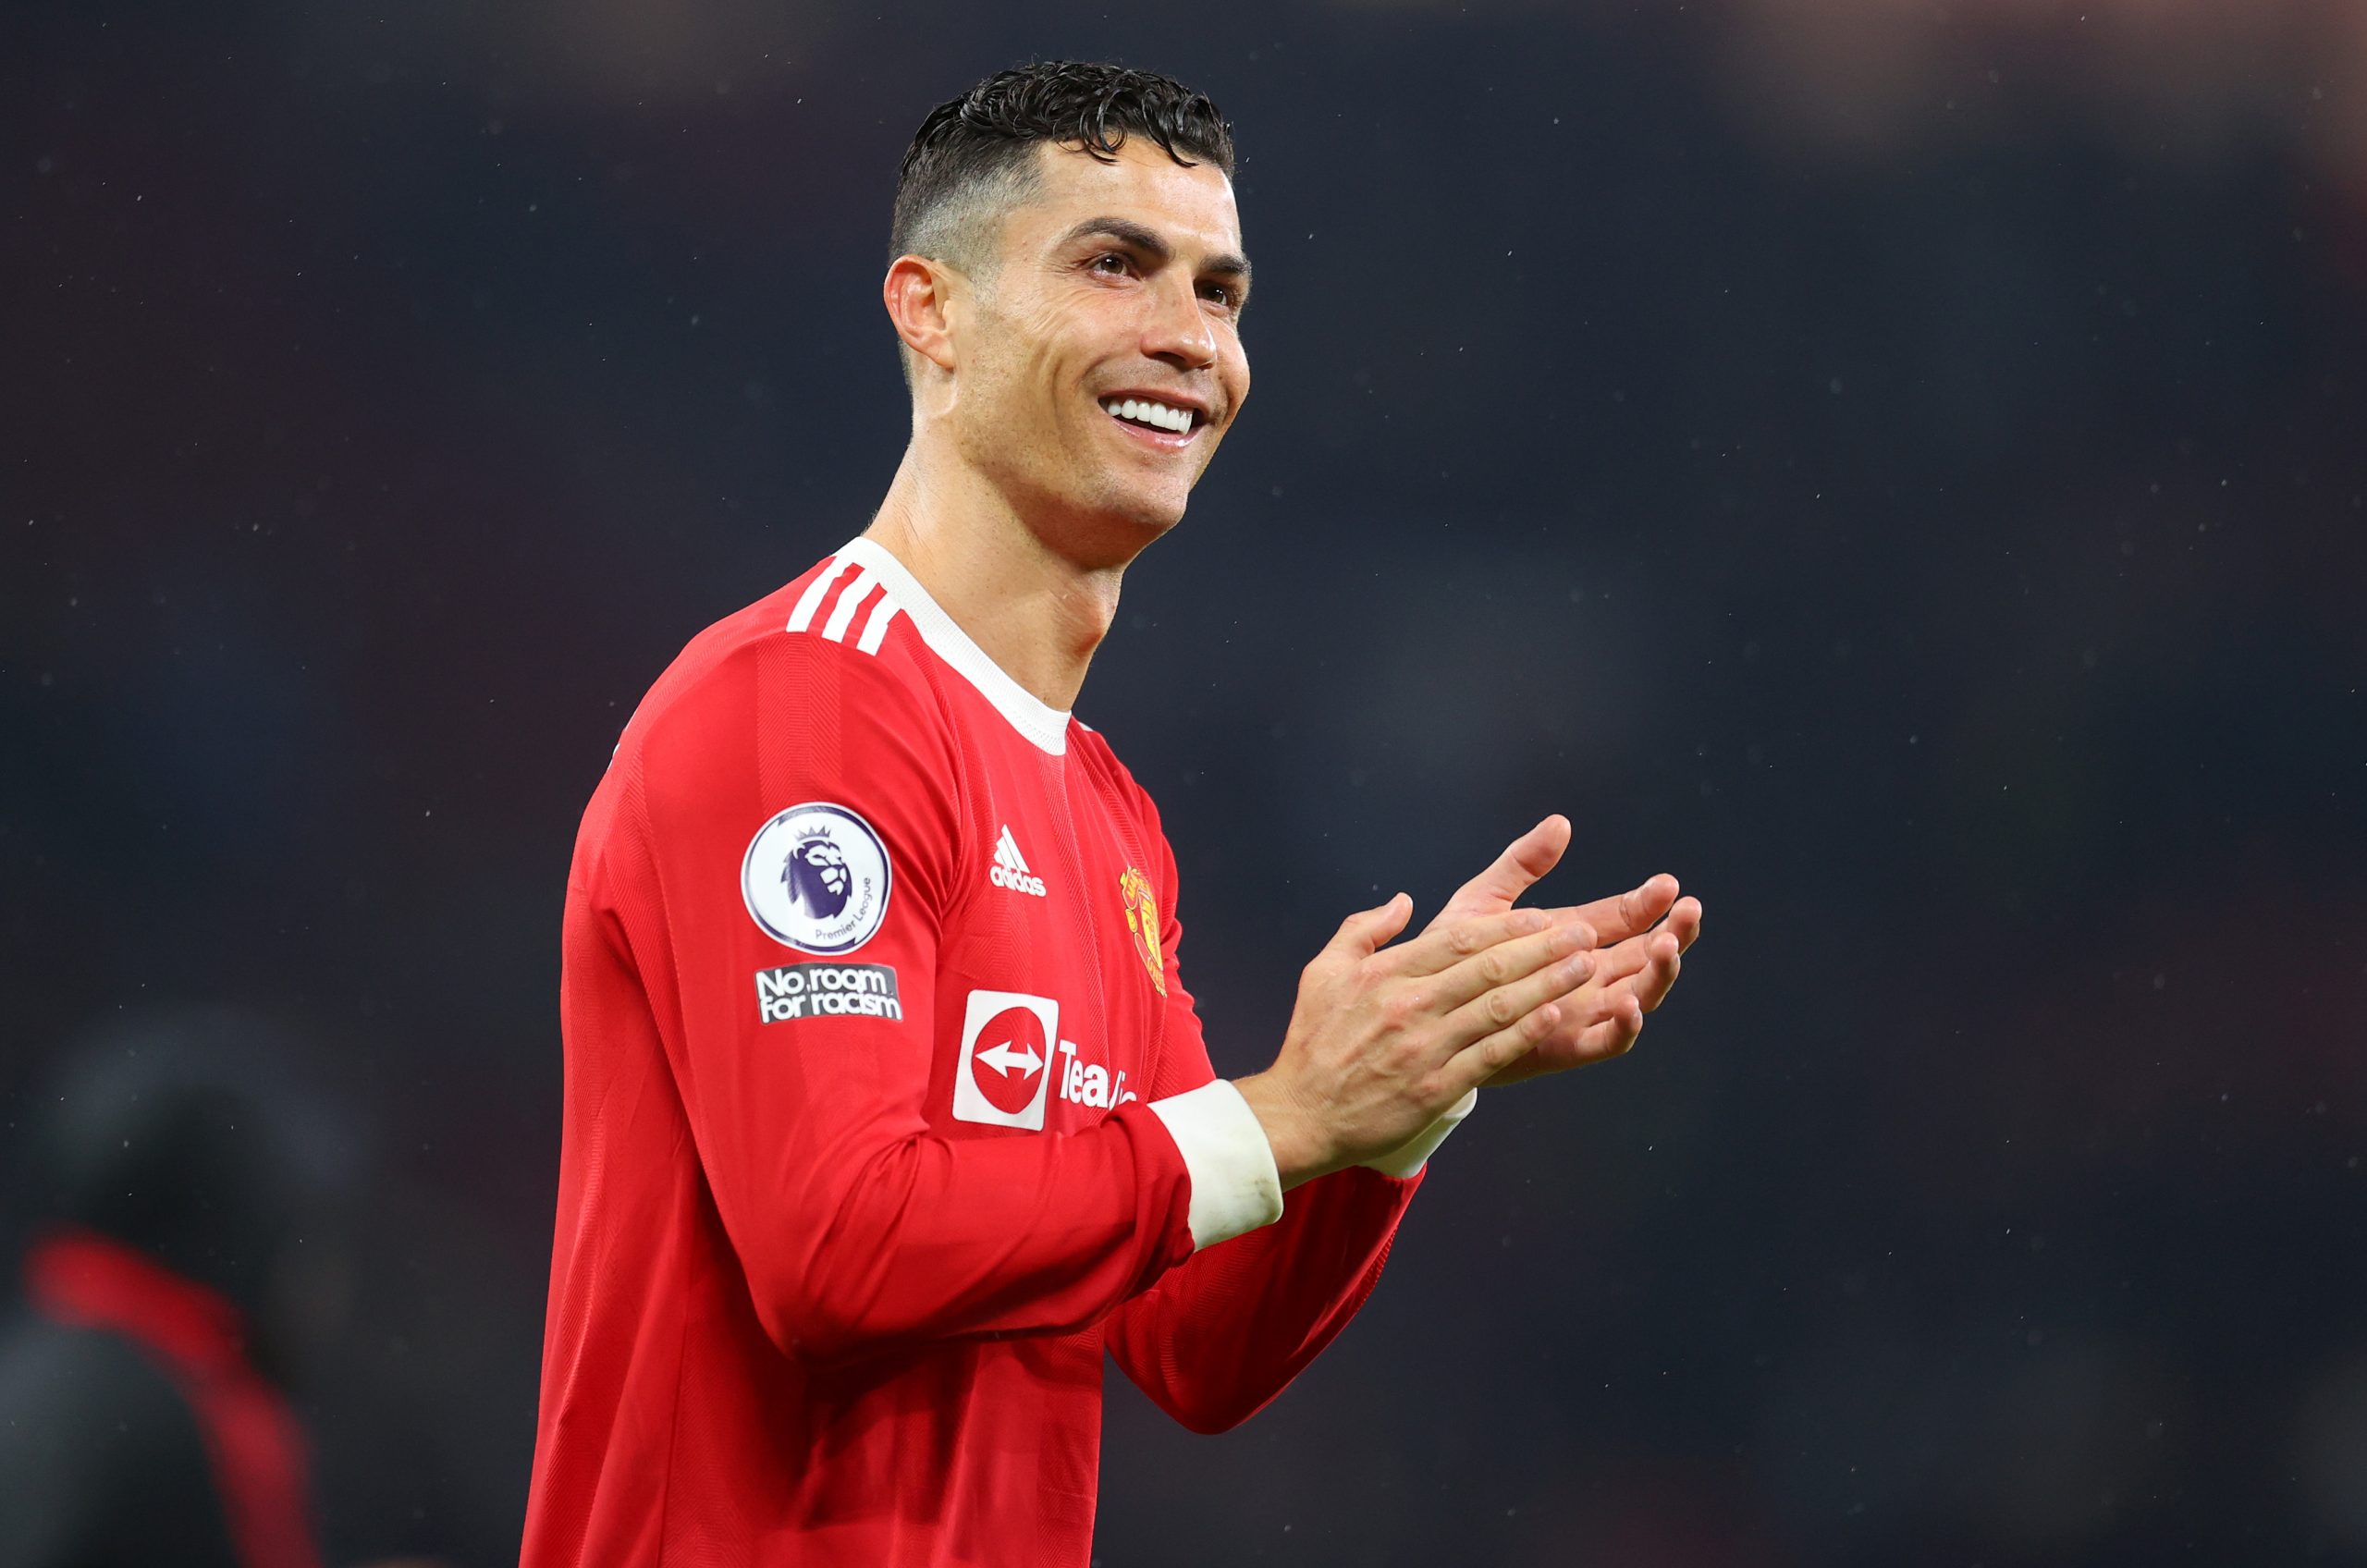 Cristiano Ronaldo of Manchester United applauds their fans after the final whistle vs Brentford. (Photo by Catherine Ivill/Getty Images)